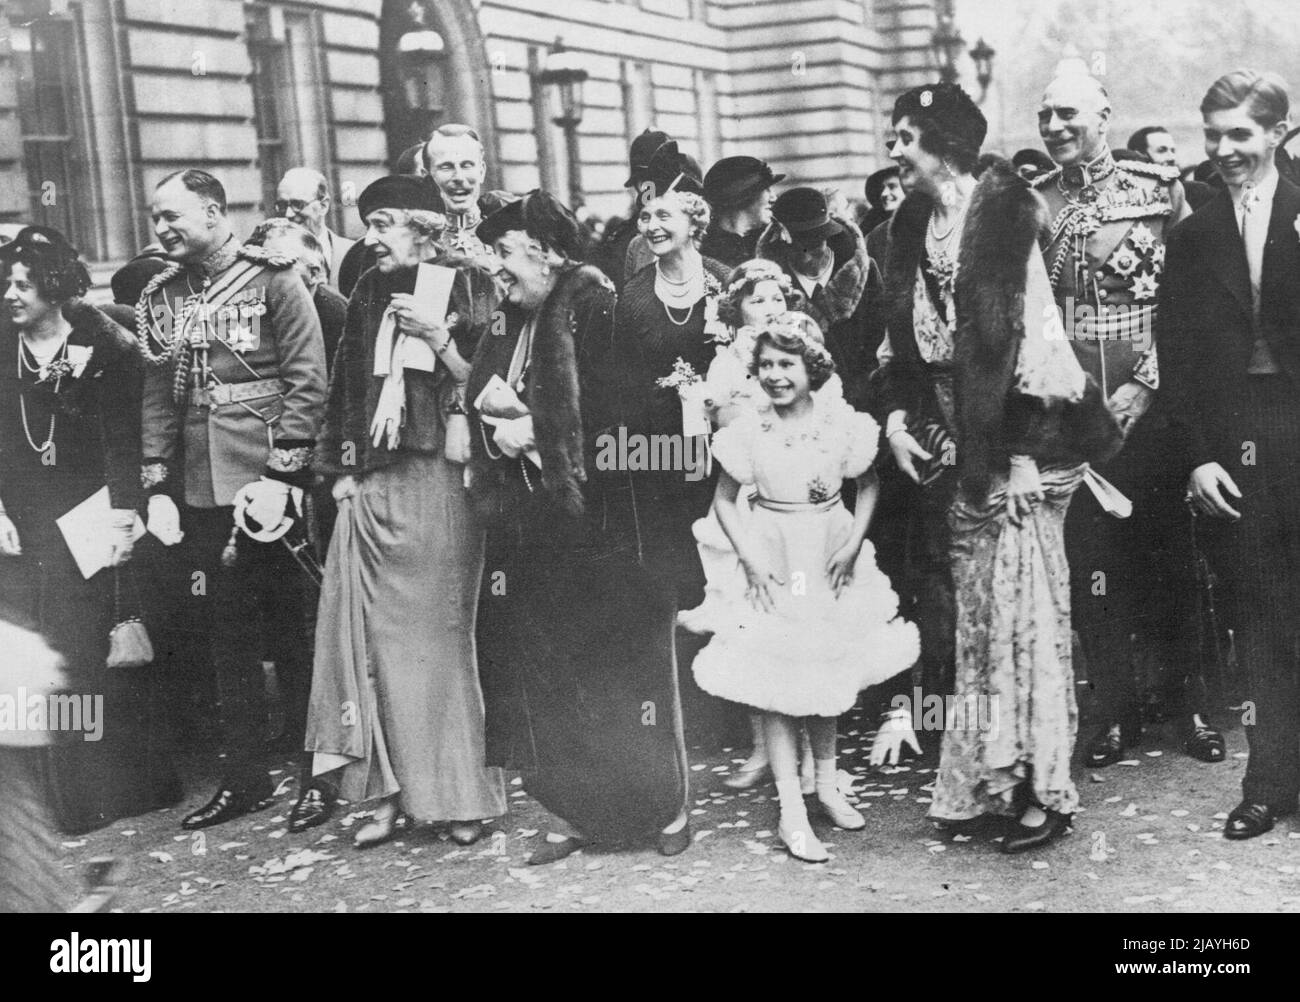 The Royal Wedding Guests Assembled In The Forscourt Of Buckingham Palace, To Bed Farewell To The Duke And Duchess Of Gloucester As They Drove To St. Pancras Station En Route For Their Honymmon -- A happy group watching the bridges and bridegroom leave the Palace. L to R. Lady Maud Carnegie, the Marquess of Cambridge, Princess Marie Louise (behind whom is Lord Carnegie), Princess Helena Victoria, the Countess of Athlane, Princess Elizabeth and behind her, Lady Mary Cambridge, Lady Patricia Ramsay, the Earl of Athlone, and Mr. A. Ramsay. November 6, 1935. (Photo by Sports & General Press Agency Stock Photo